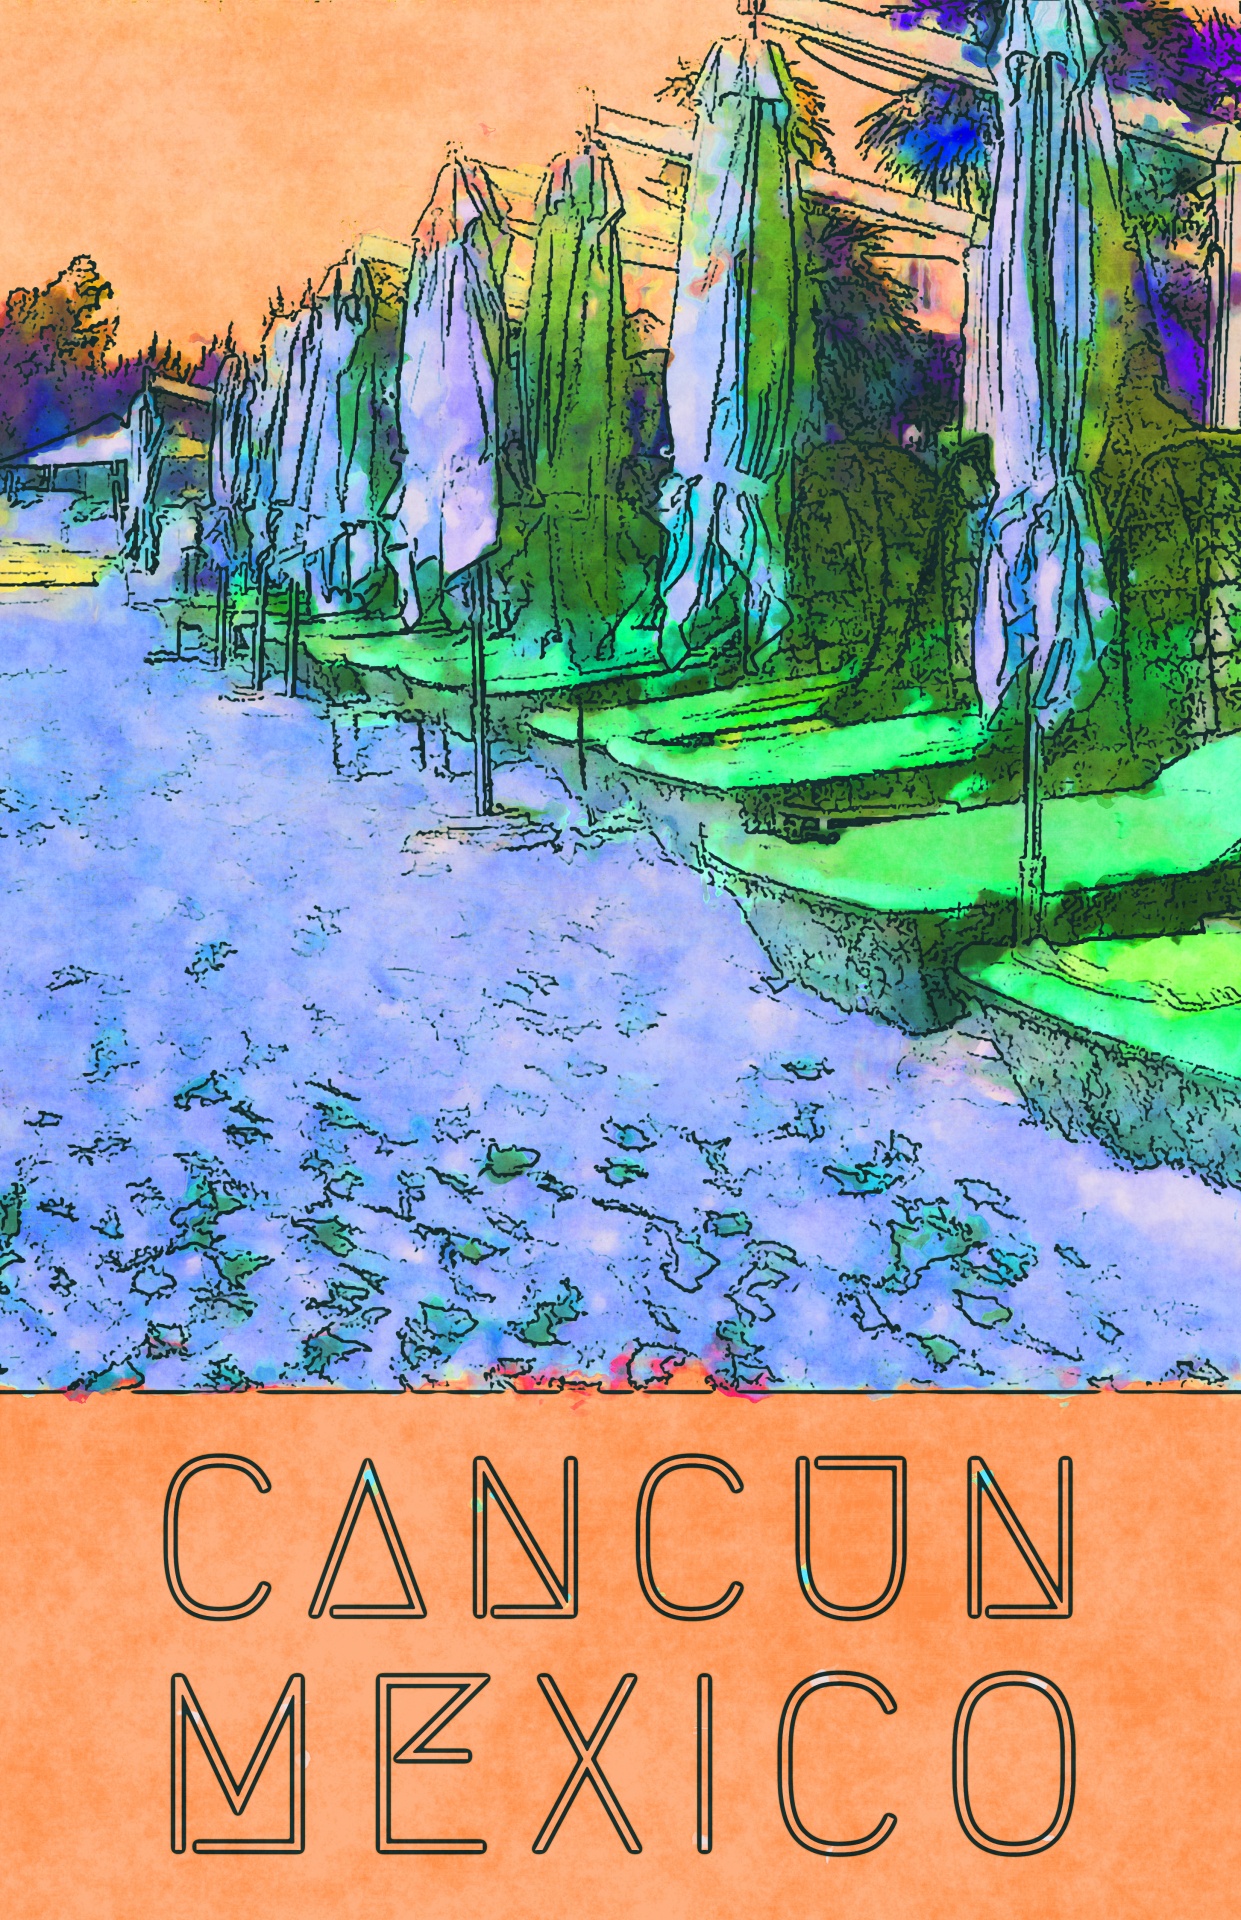 Cancun Travel Poster